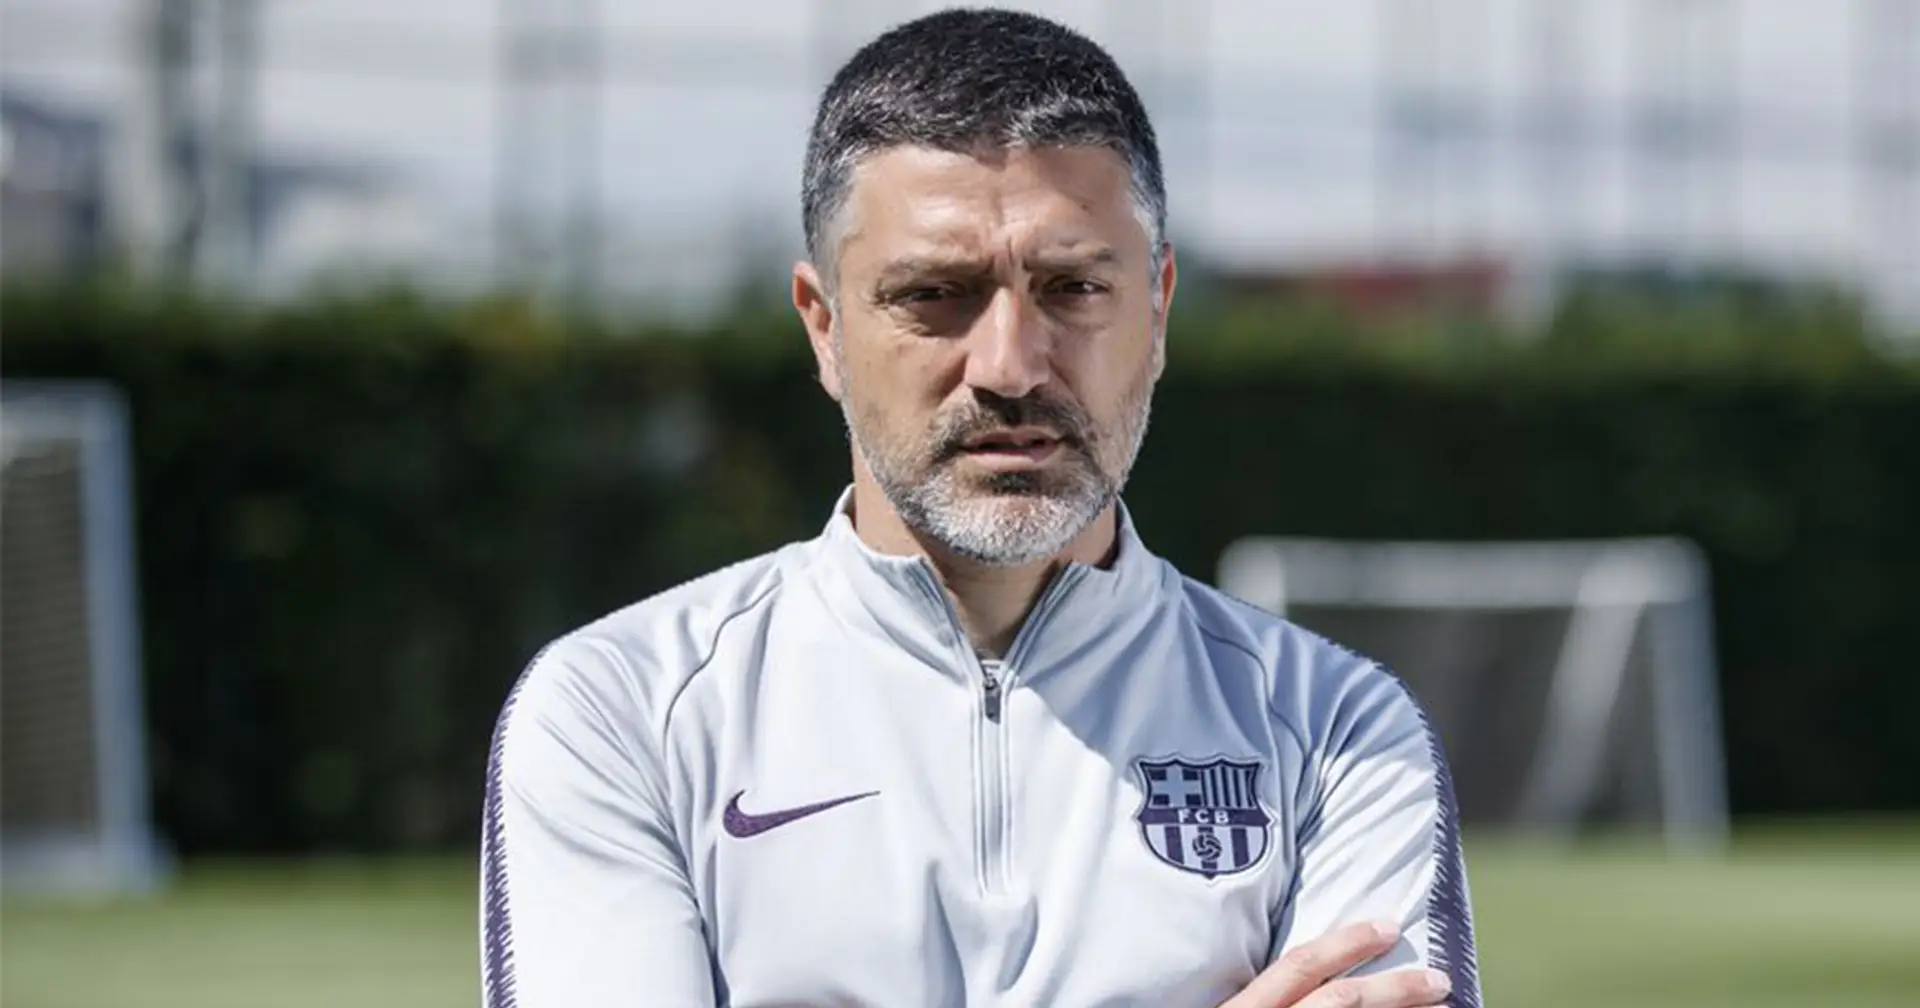 'I work to be prepared if the club needs me': Barca B coach Pimienta on managing first team one day